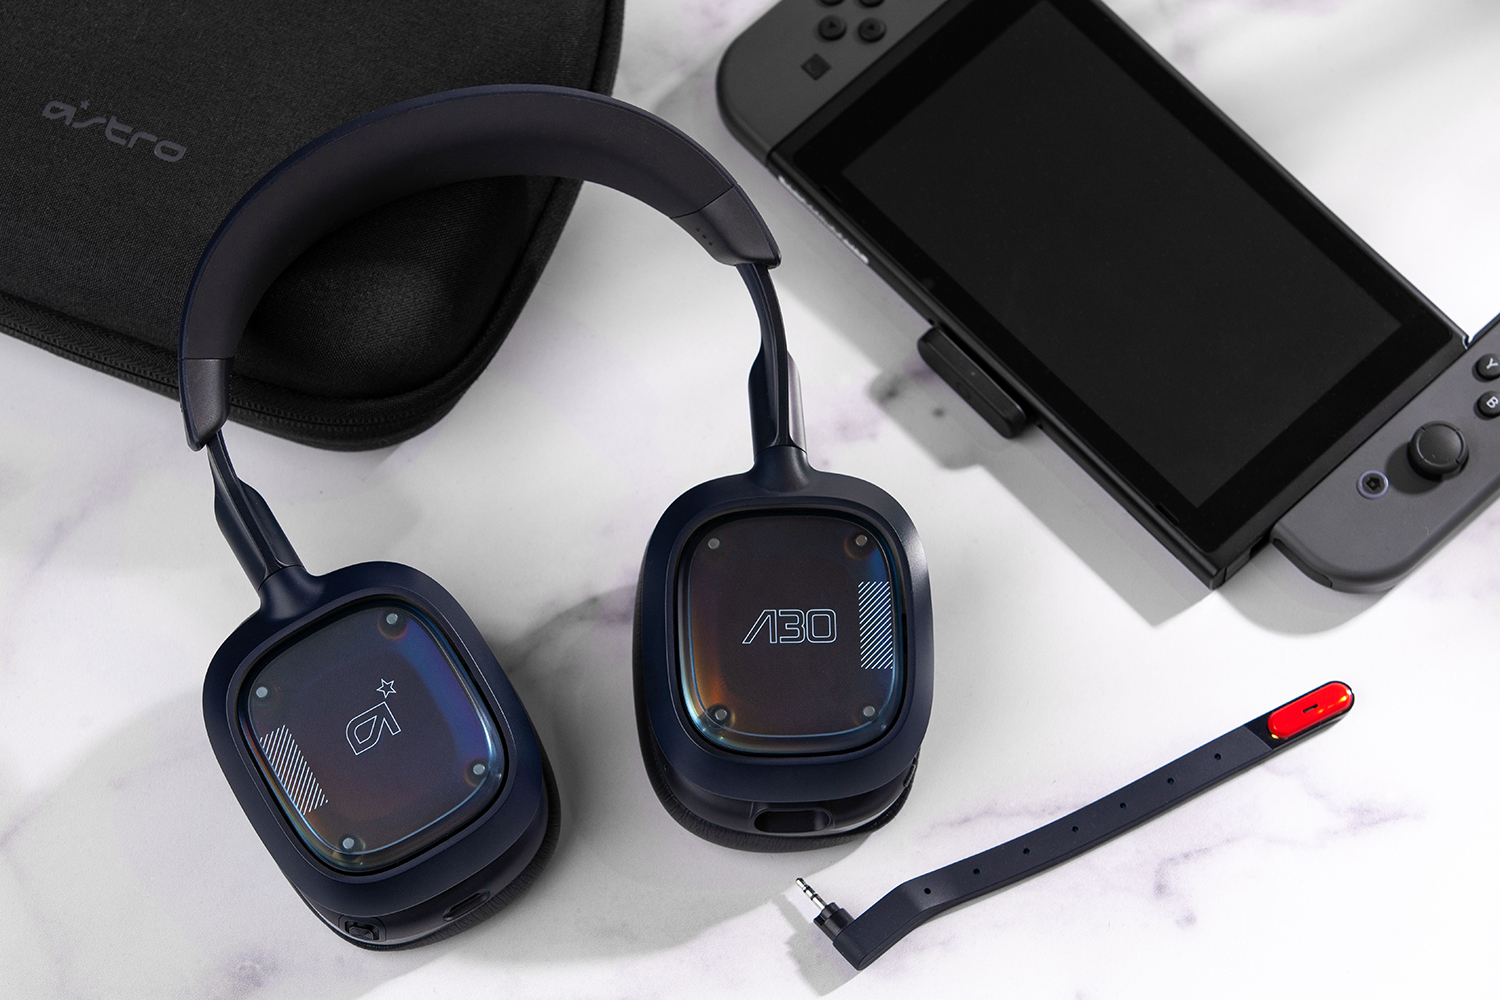 Astro A30 headset with Nintendo Switch